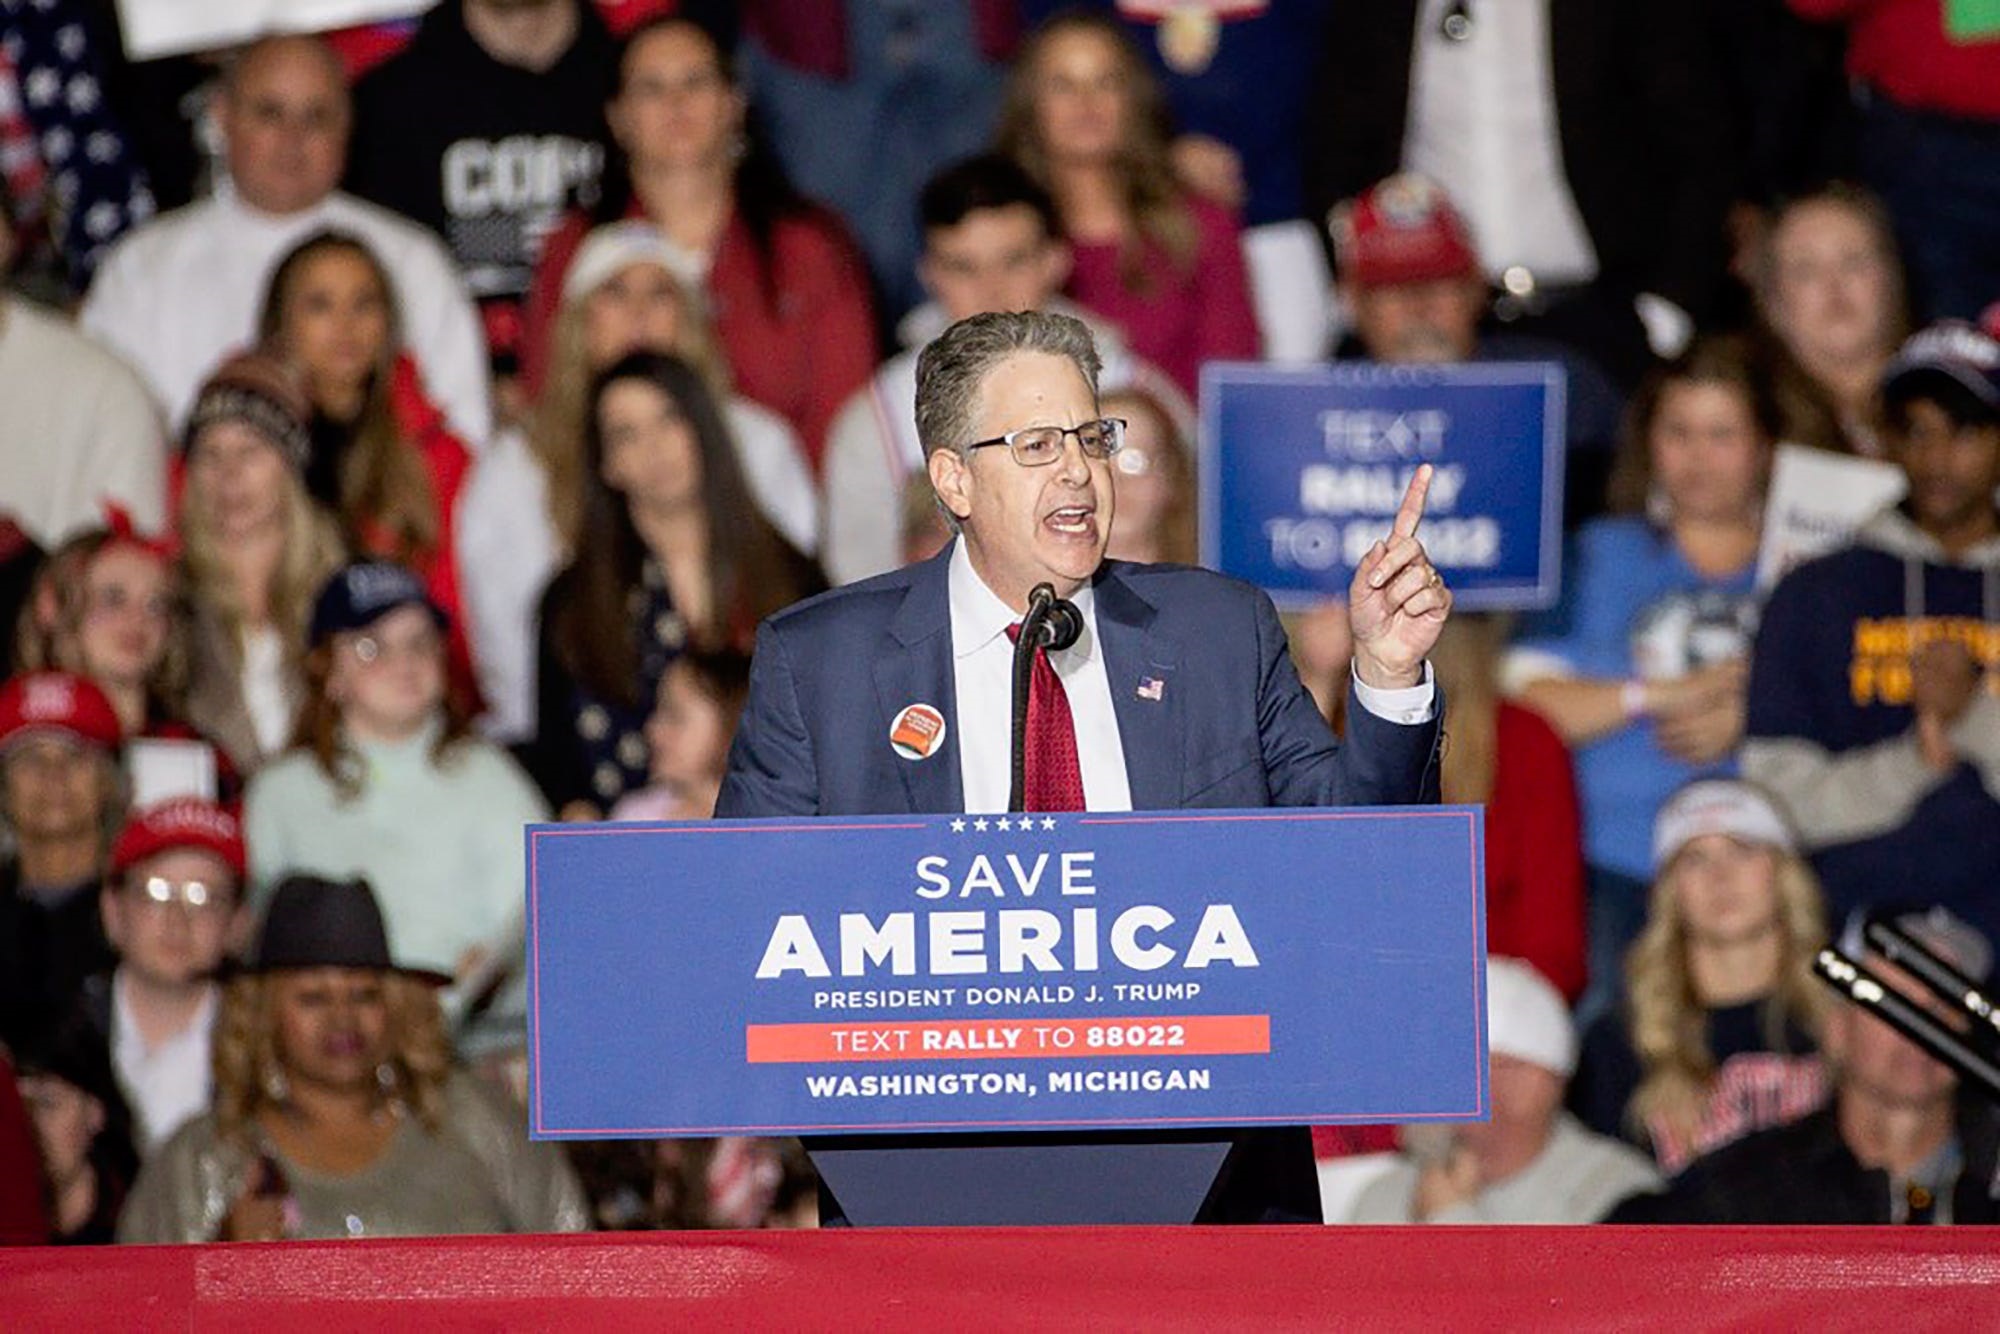 PHOTO: Matt DePerno, Republican candidate for Michigan Attorney General speaks at a Save America rally in Washington Township, Mich., April 2, 2022.